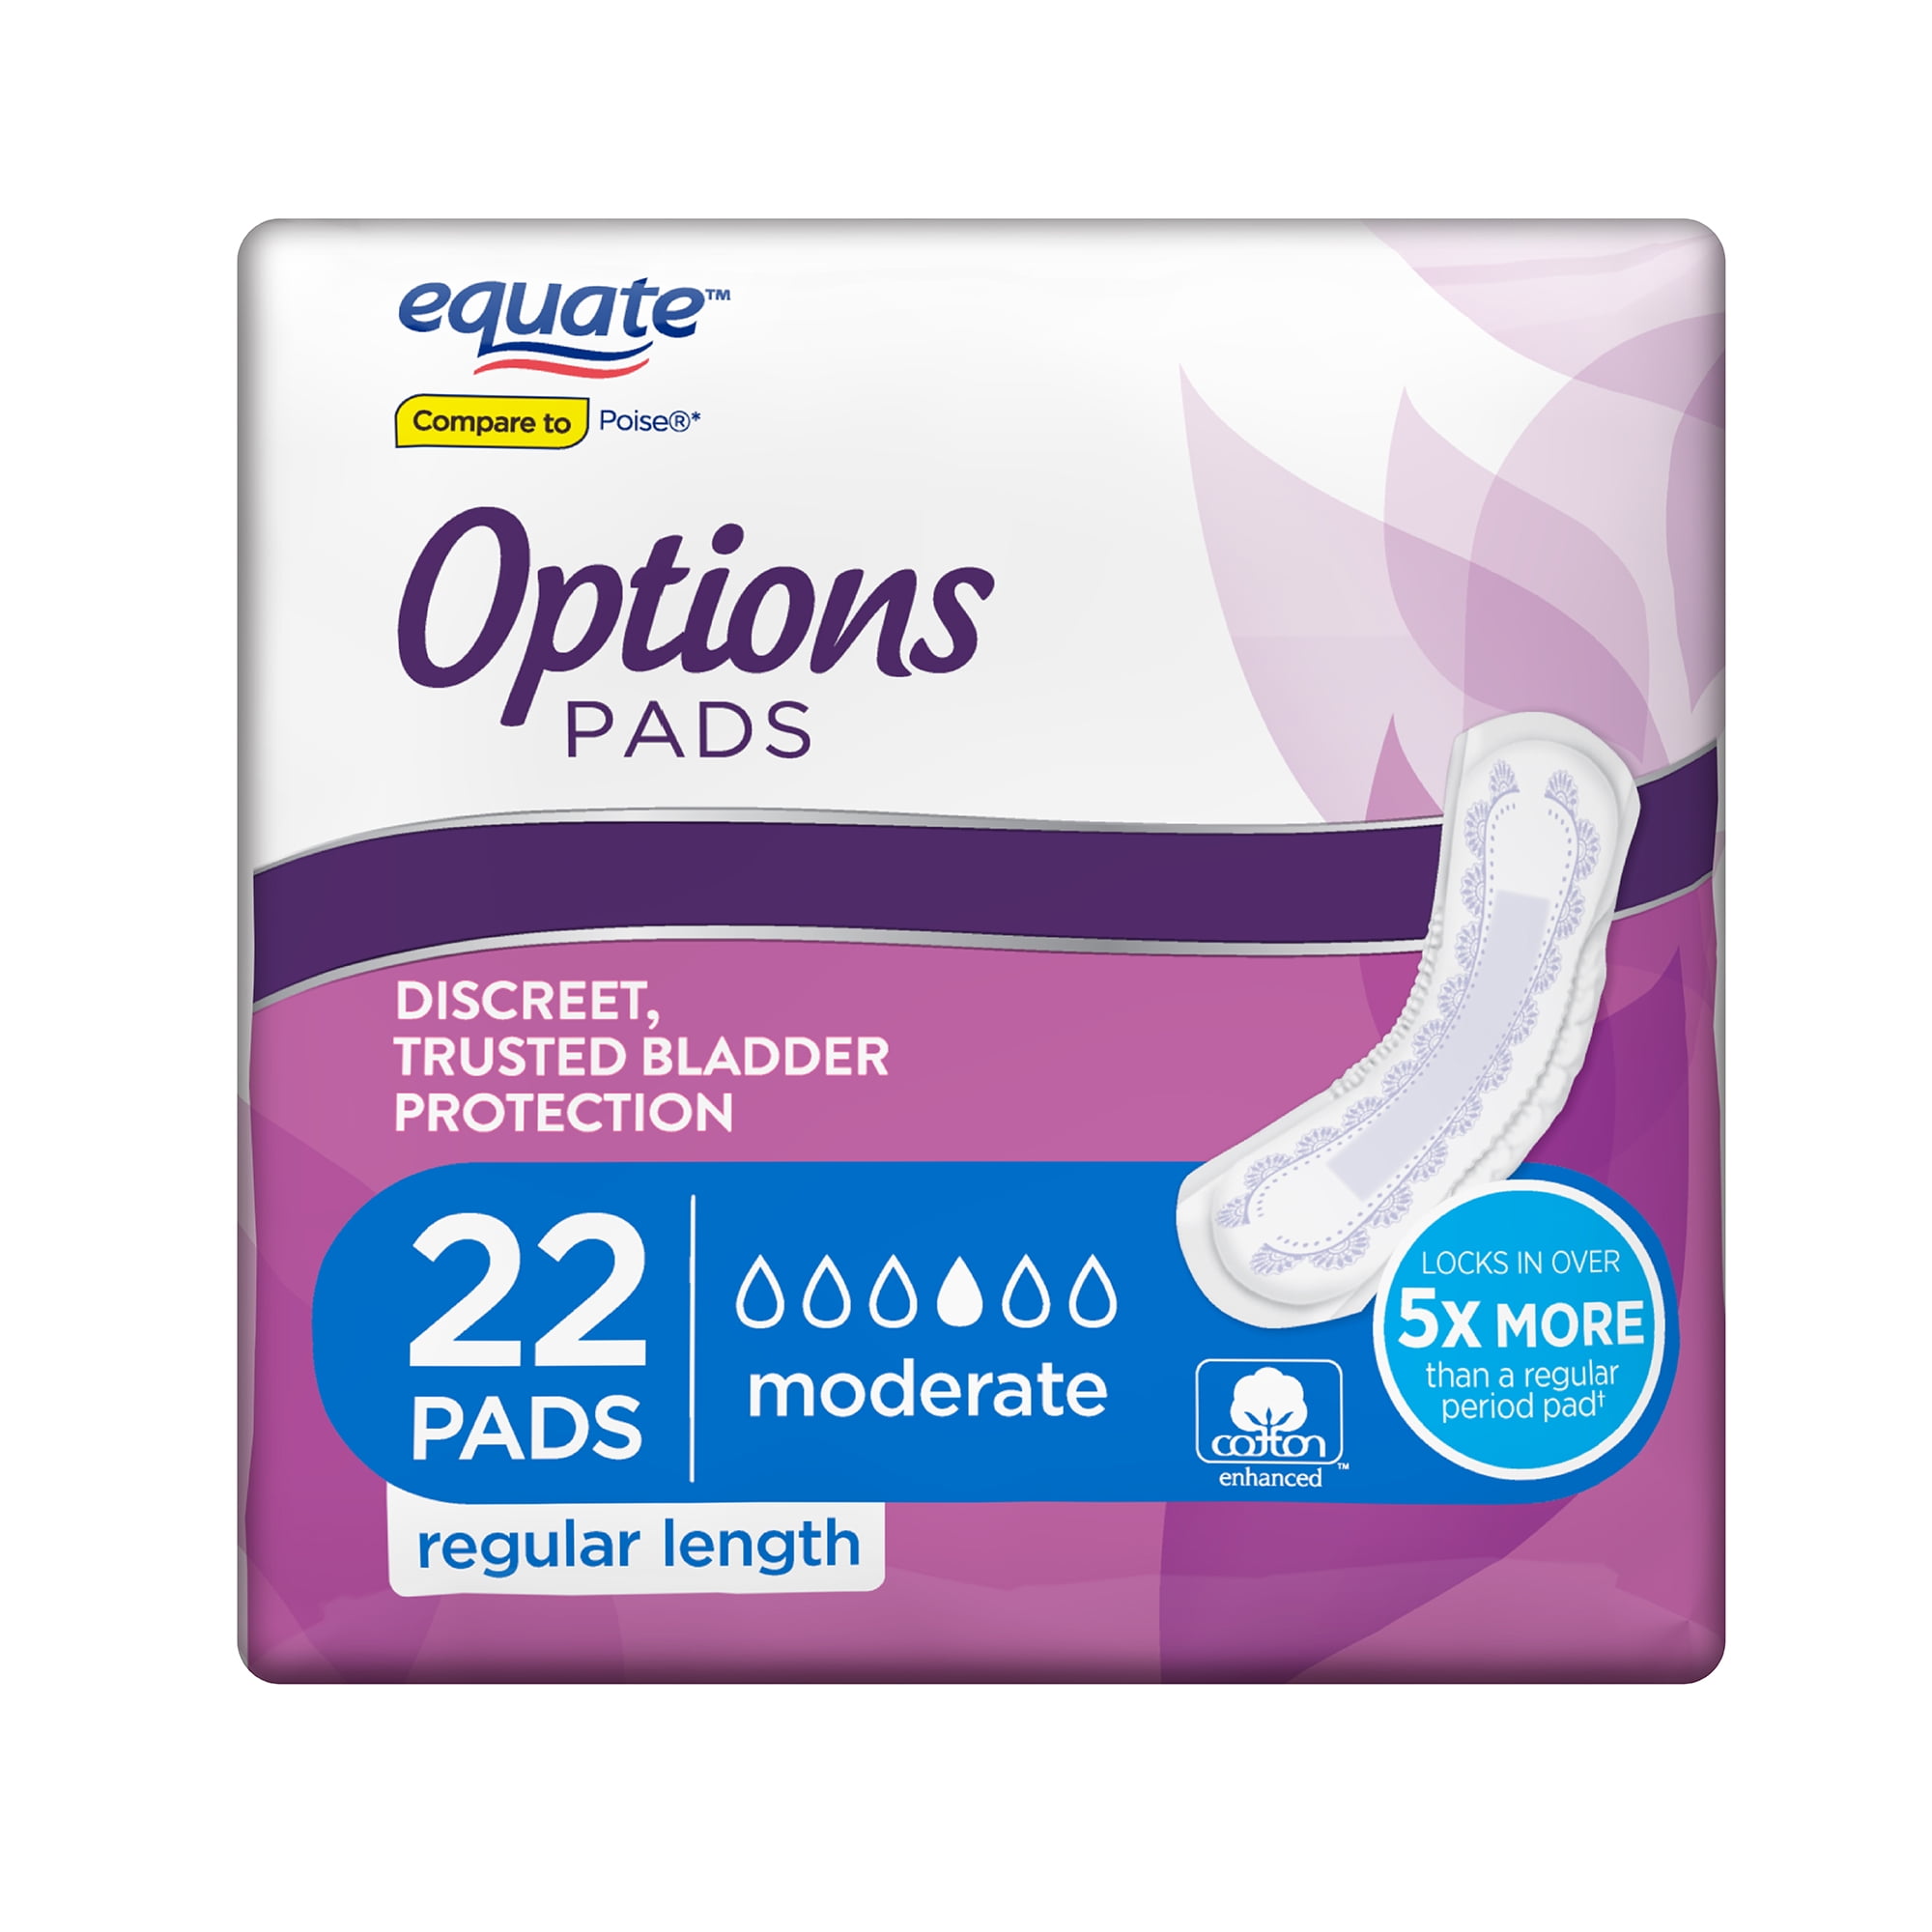 Equate Incontinence Underwear